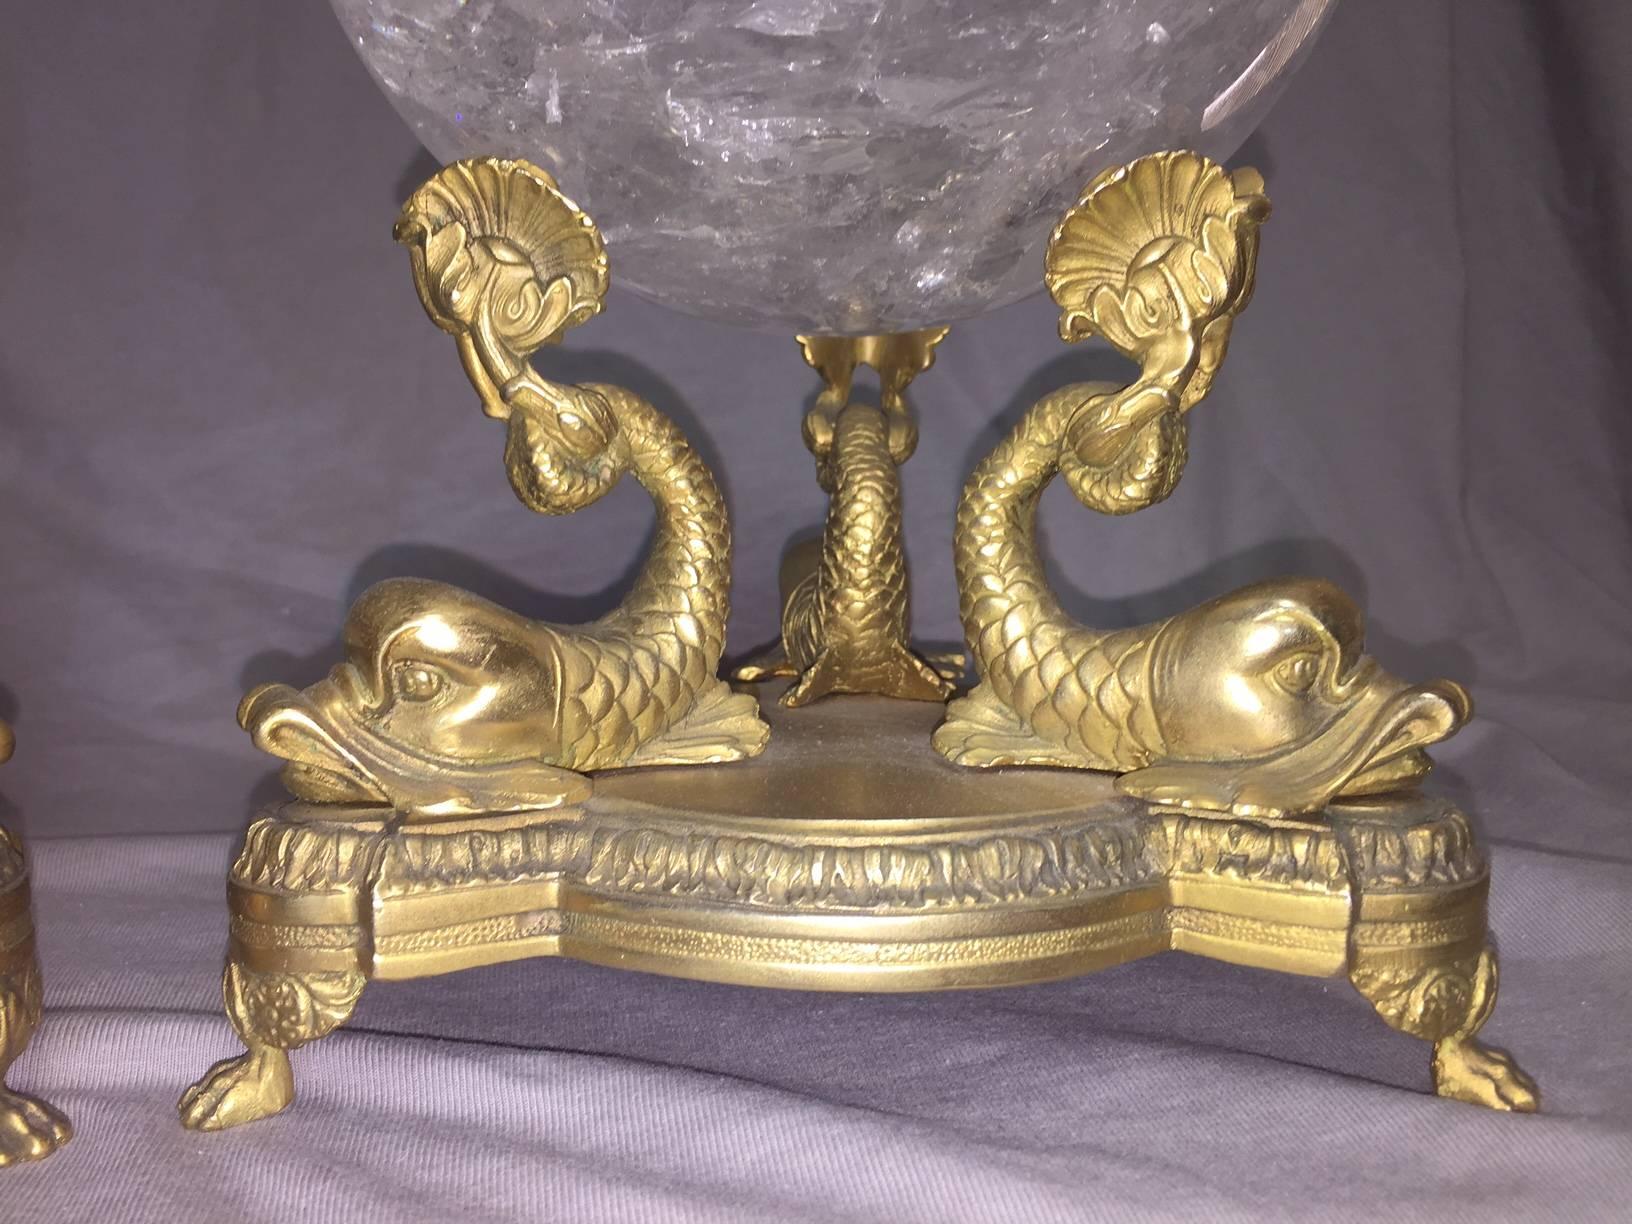 European Pair of Neoclassical Rock Crystal Spheres on Bronze Bases For Sale